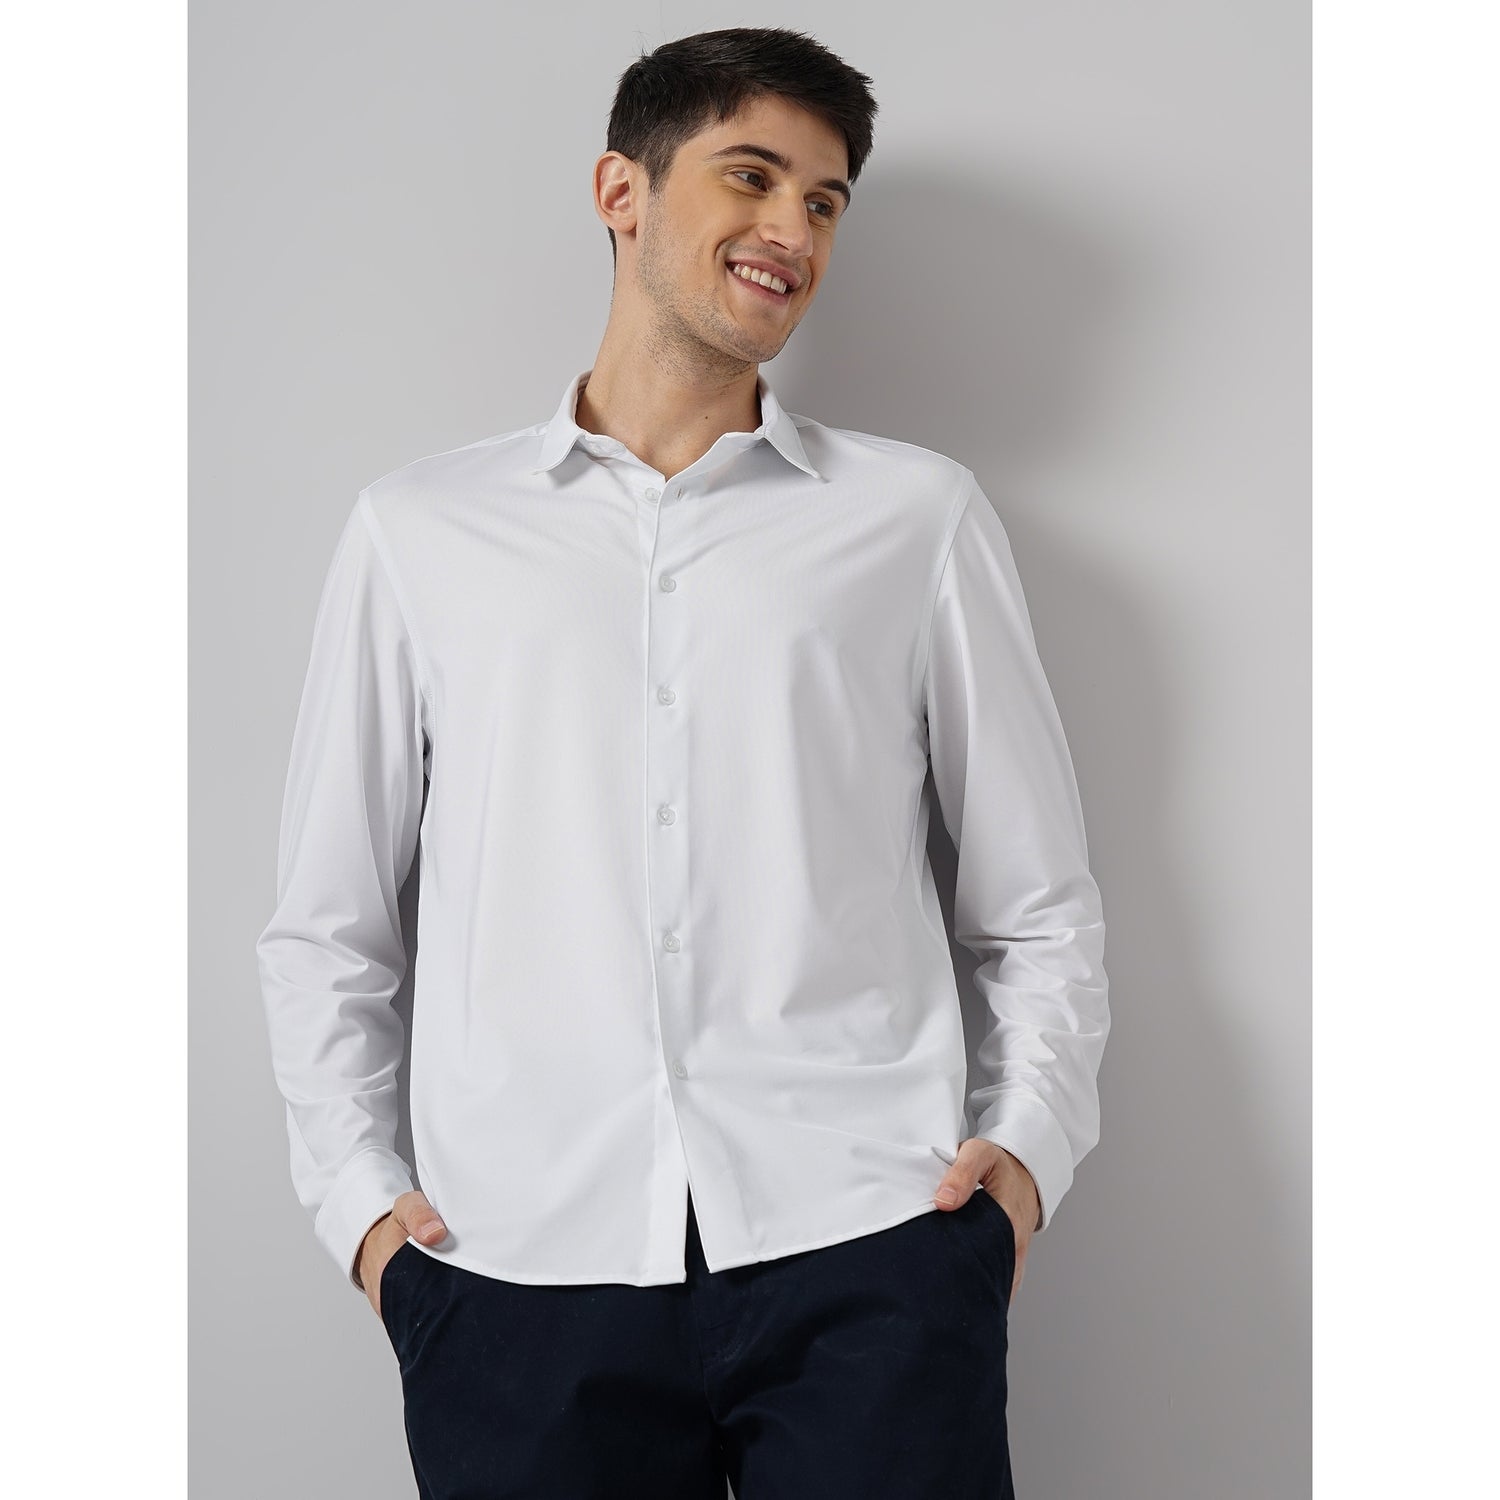 Men White Spread Collar Solid Regular Fit Polyester Knit Casual Shirt (GASTRETCHO)